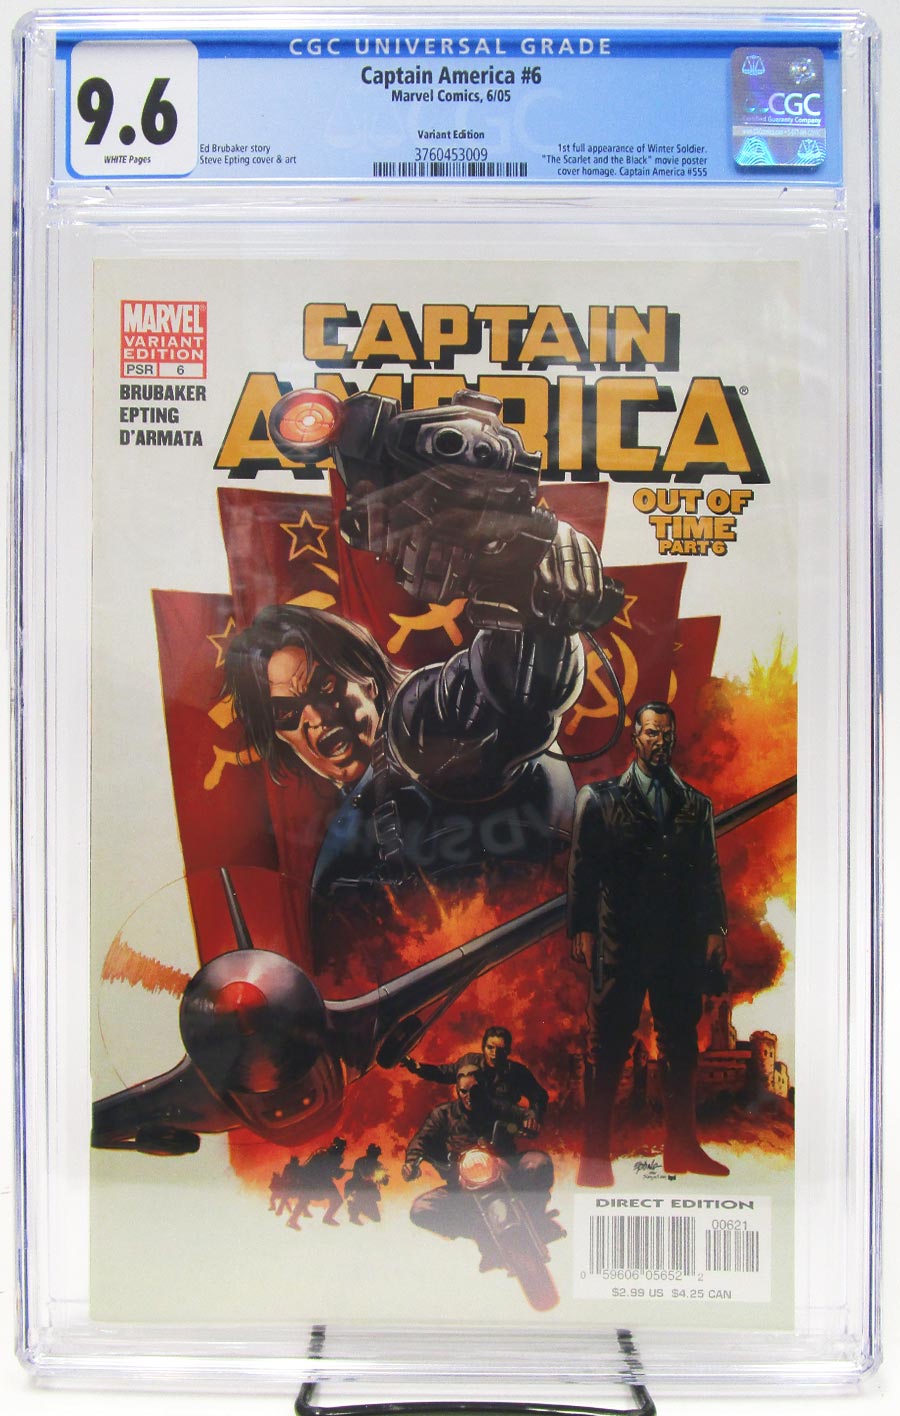 Captain America Vol 5 #6 Cover C Limited Edition Variant Cover CGC 9.6